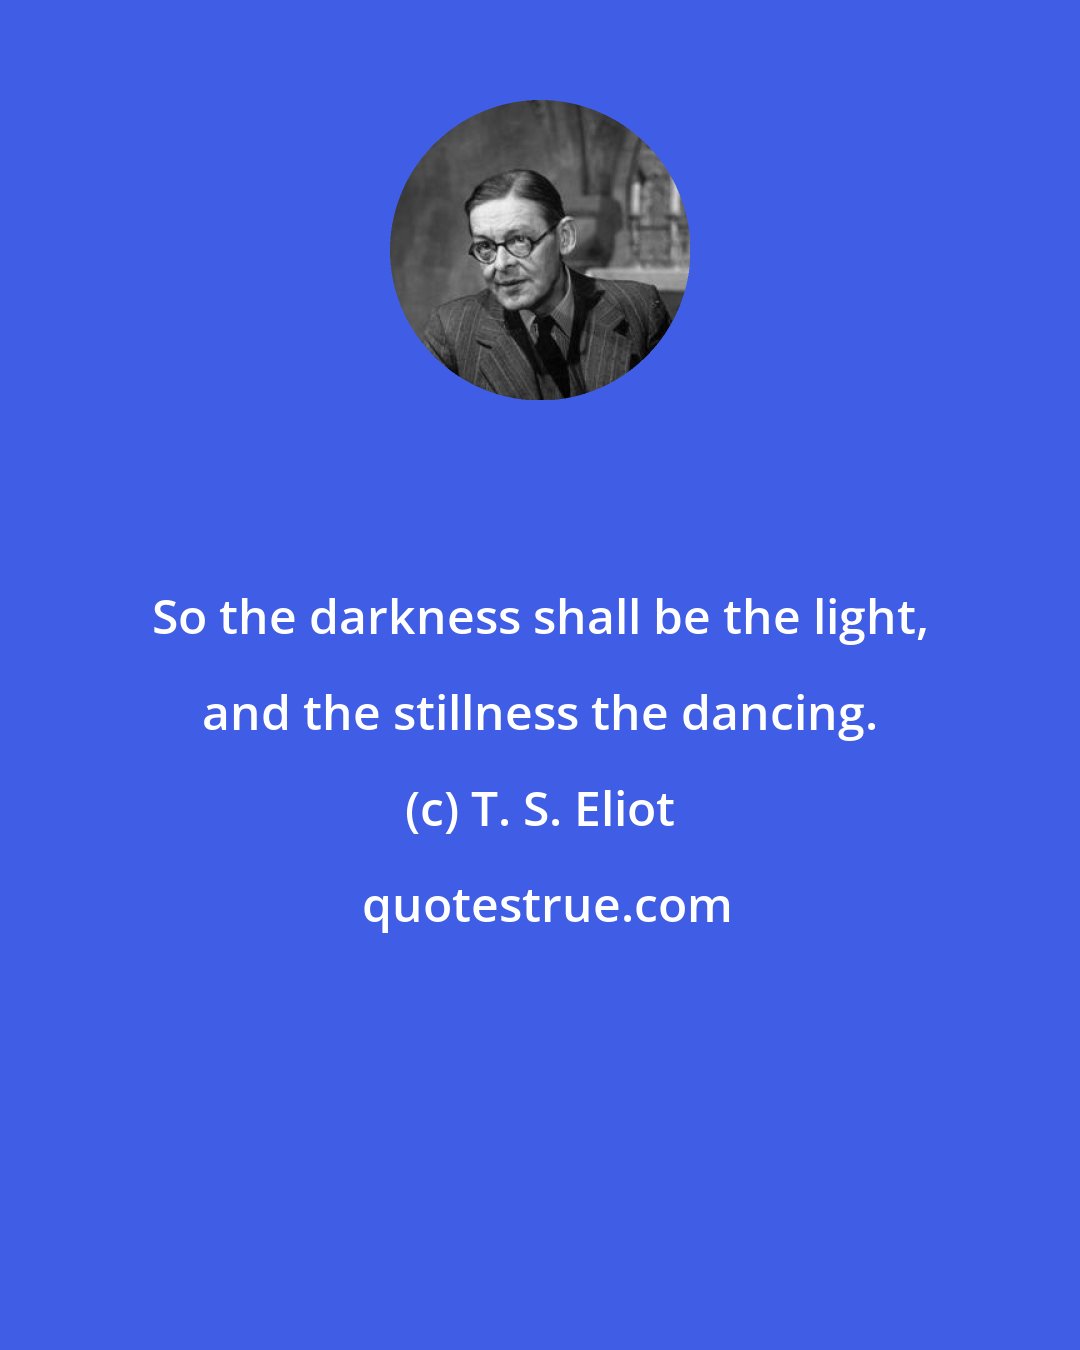 T. S. Eliot: So the darkness shall be the light, and the stillness the dancing.